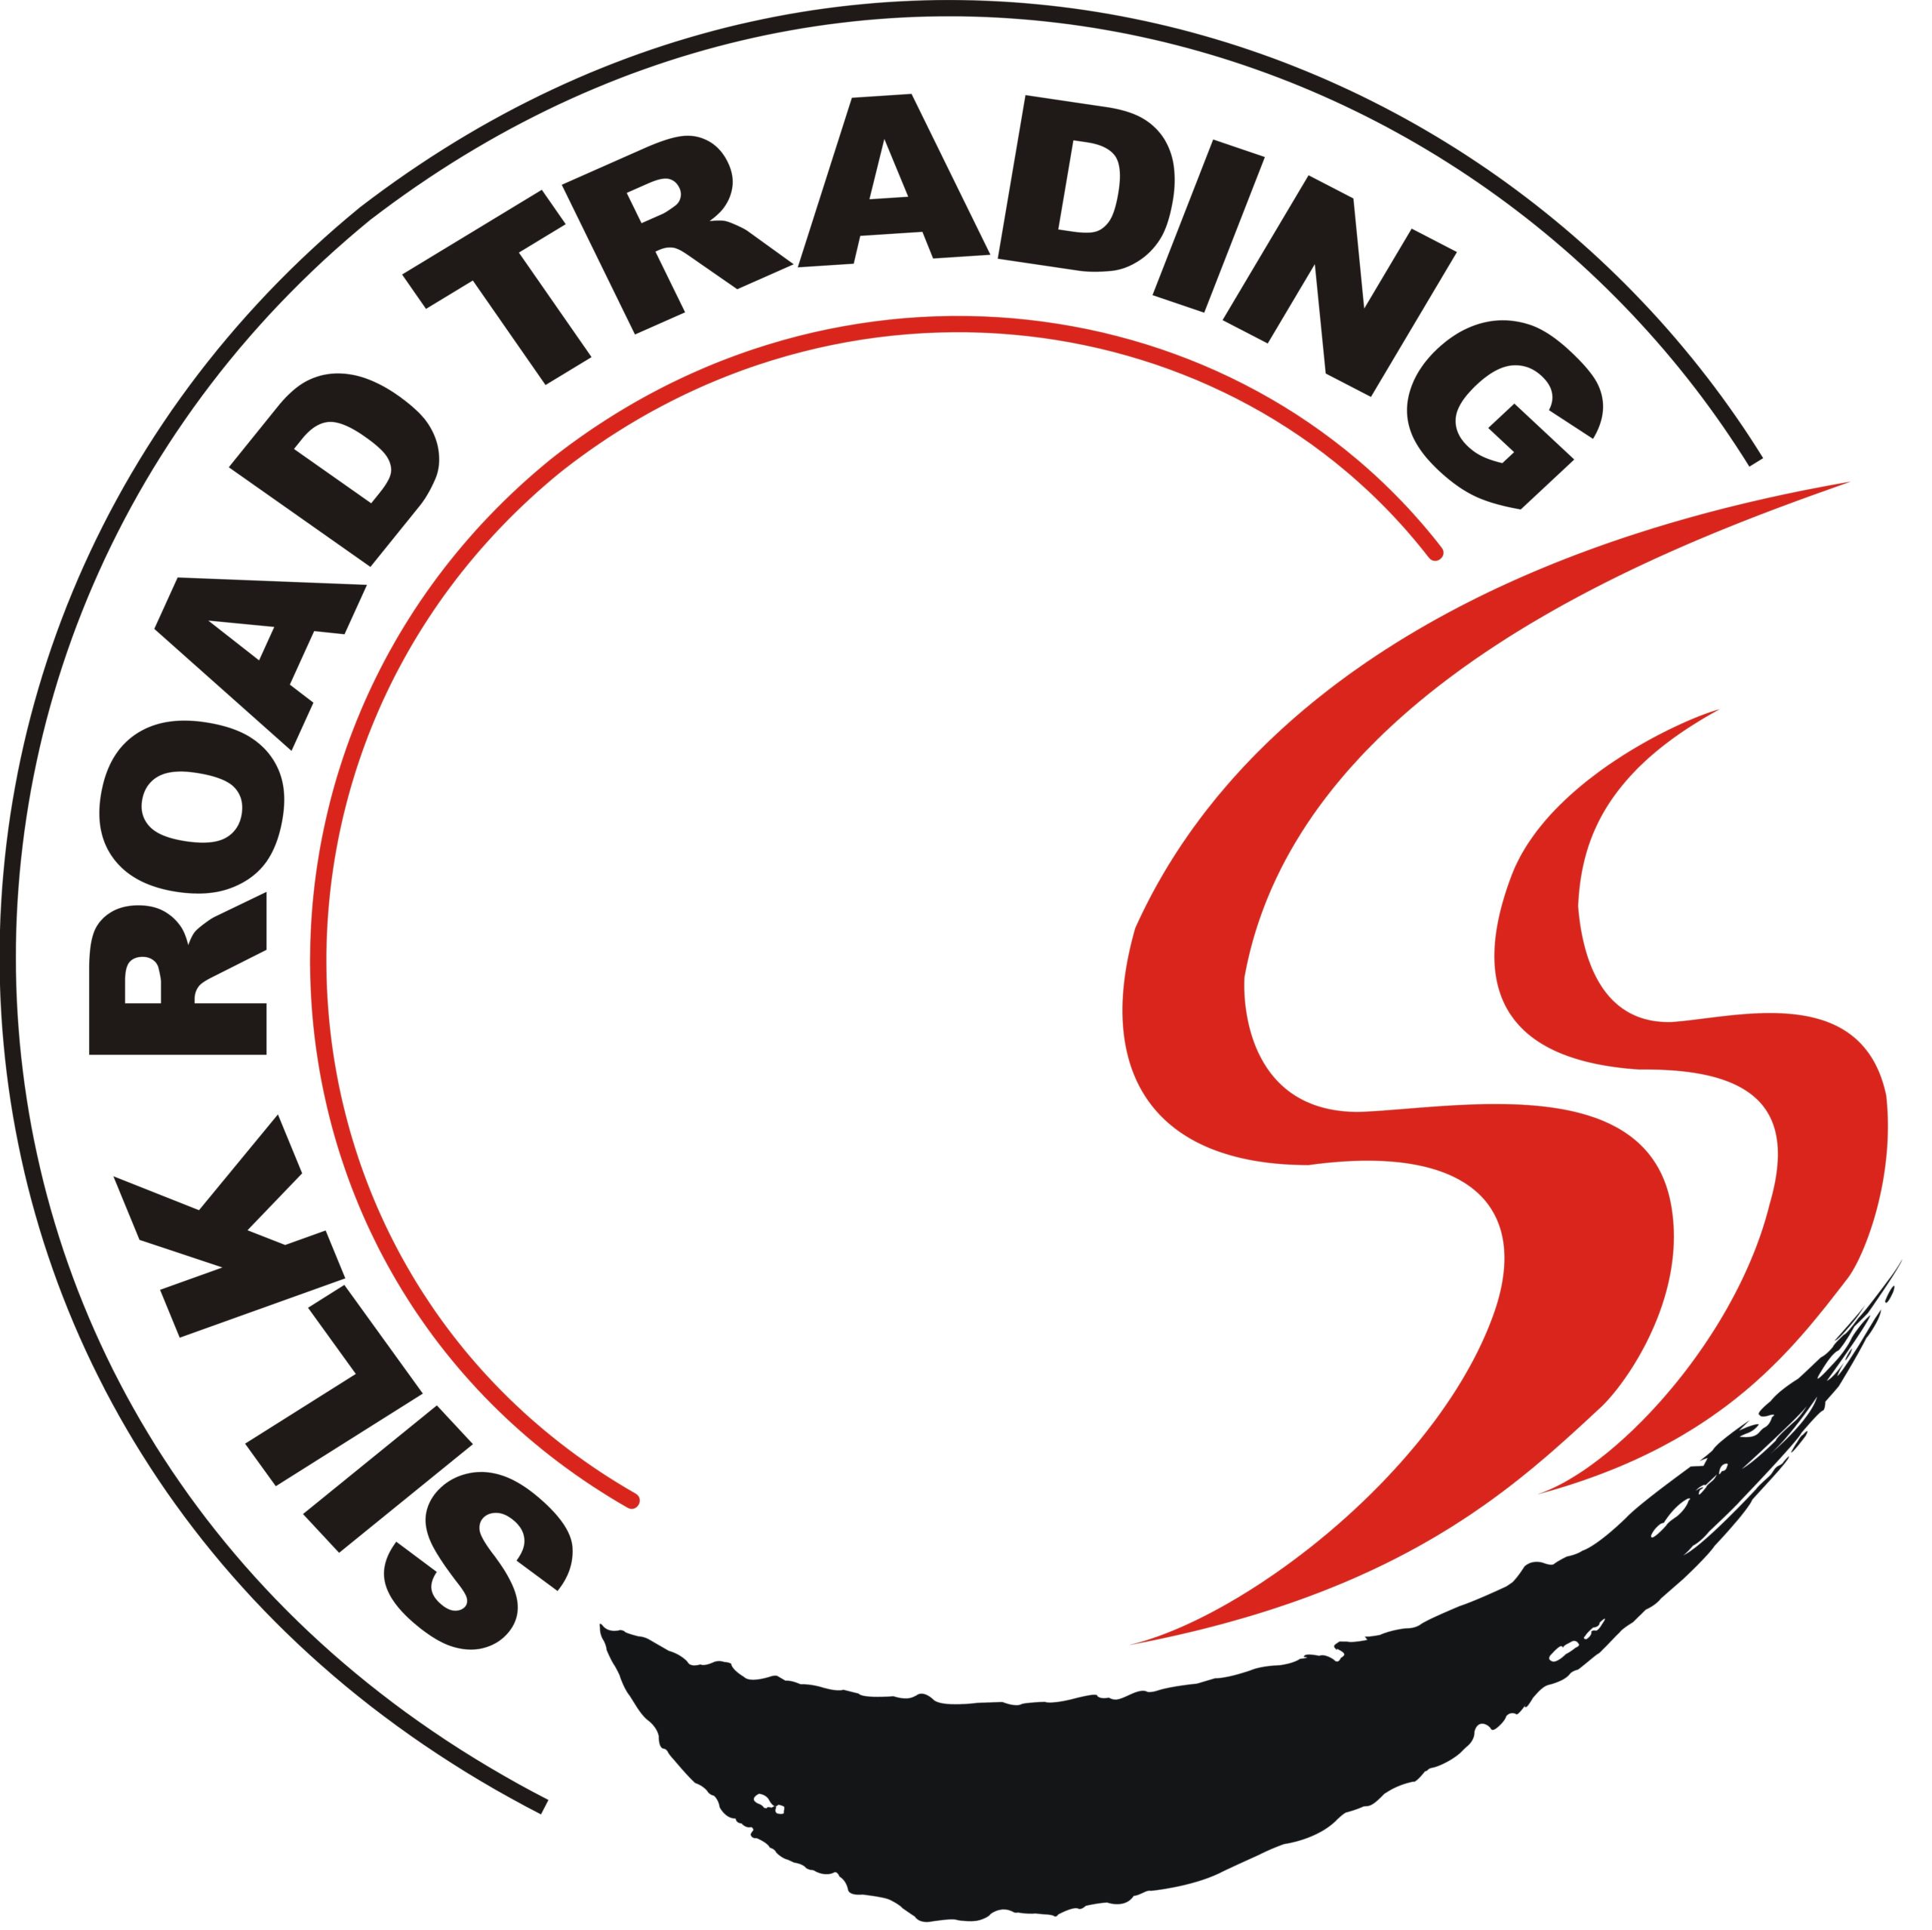 Silk Road Trading & Consulting